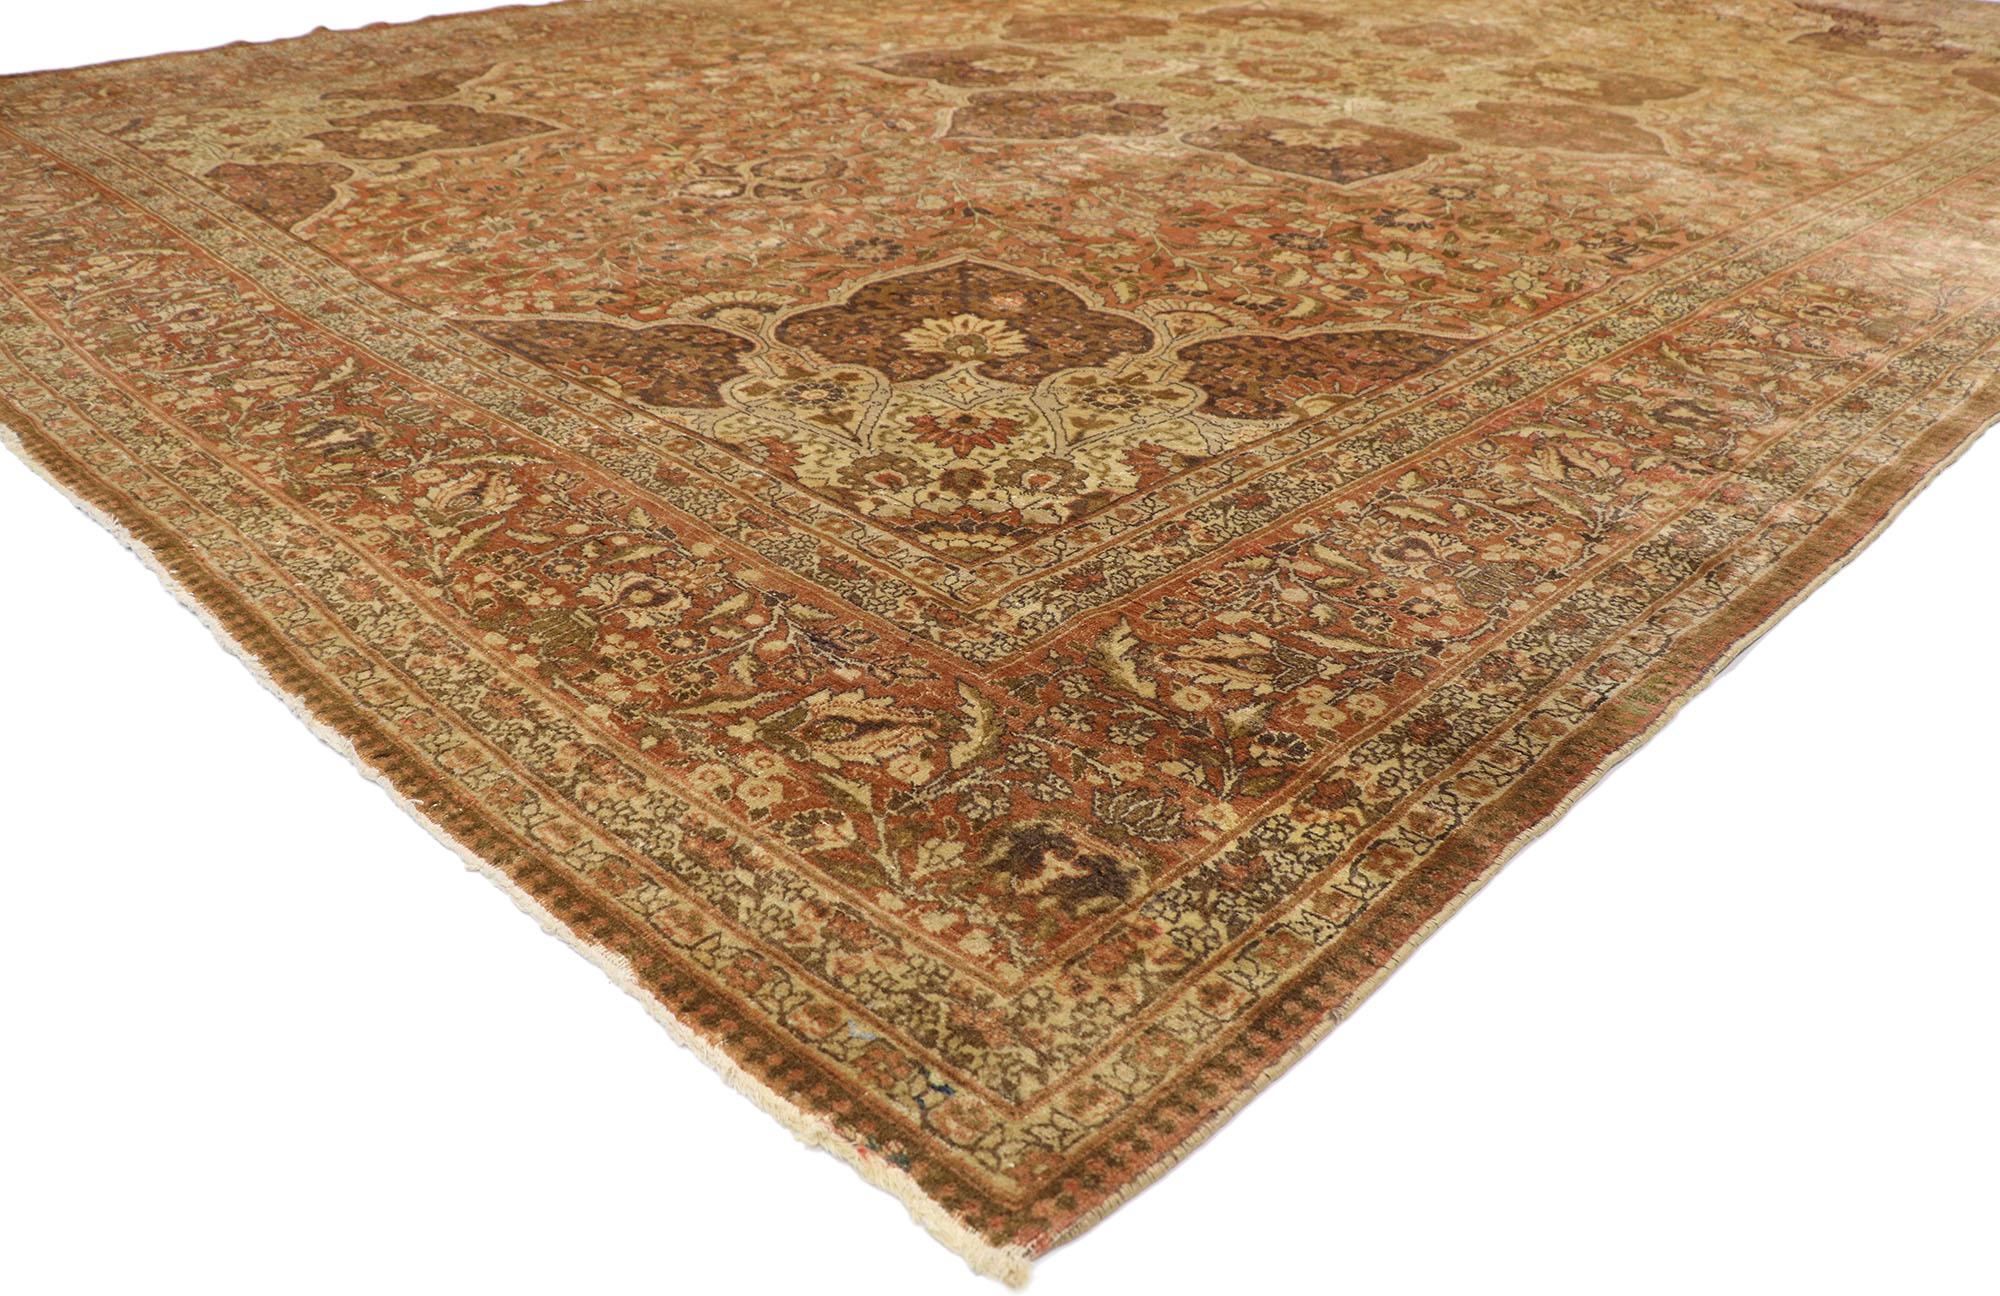 73962, Haji Khalili antique Persian Tabriz Palace size rug with warm, rustic style. This hand-knotted wool Haji Khalili antique Persian Tabriz palace size rug features an eight-point centre medallion filled with blooming palmettes and florals